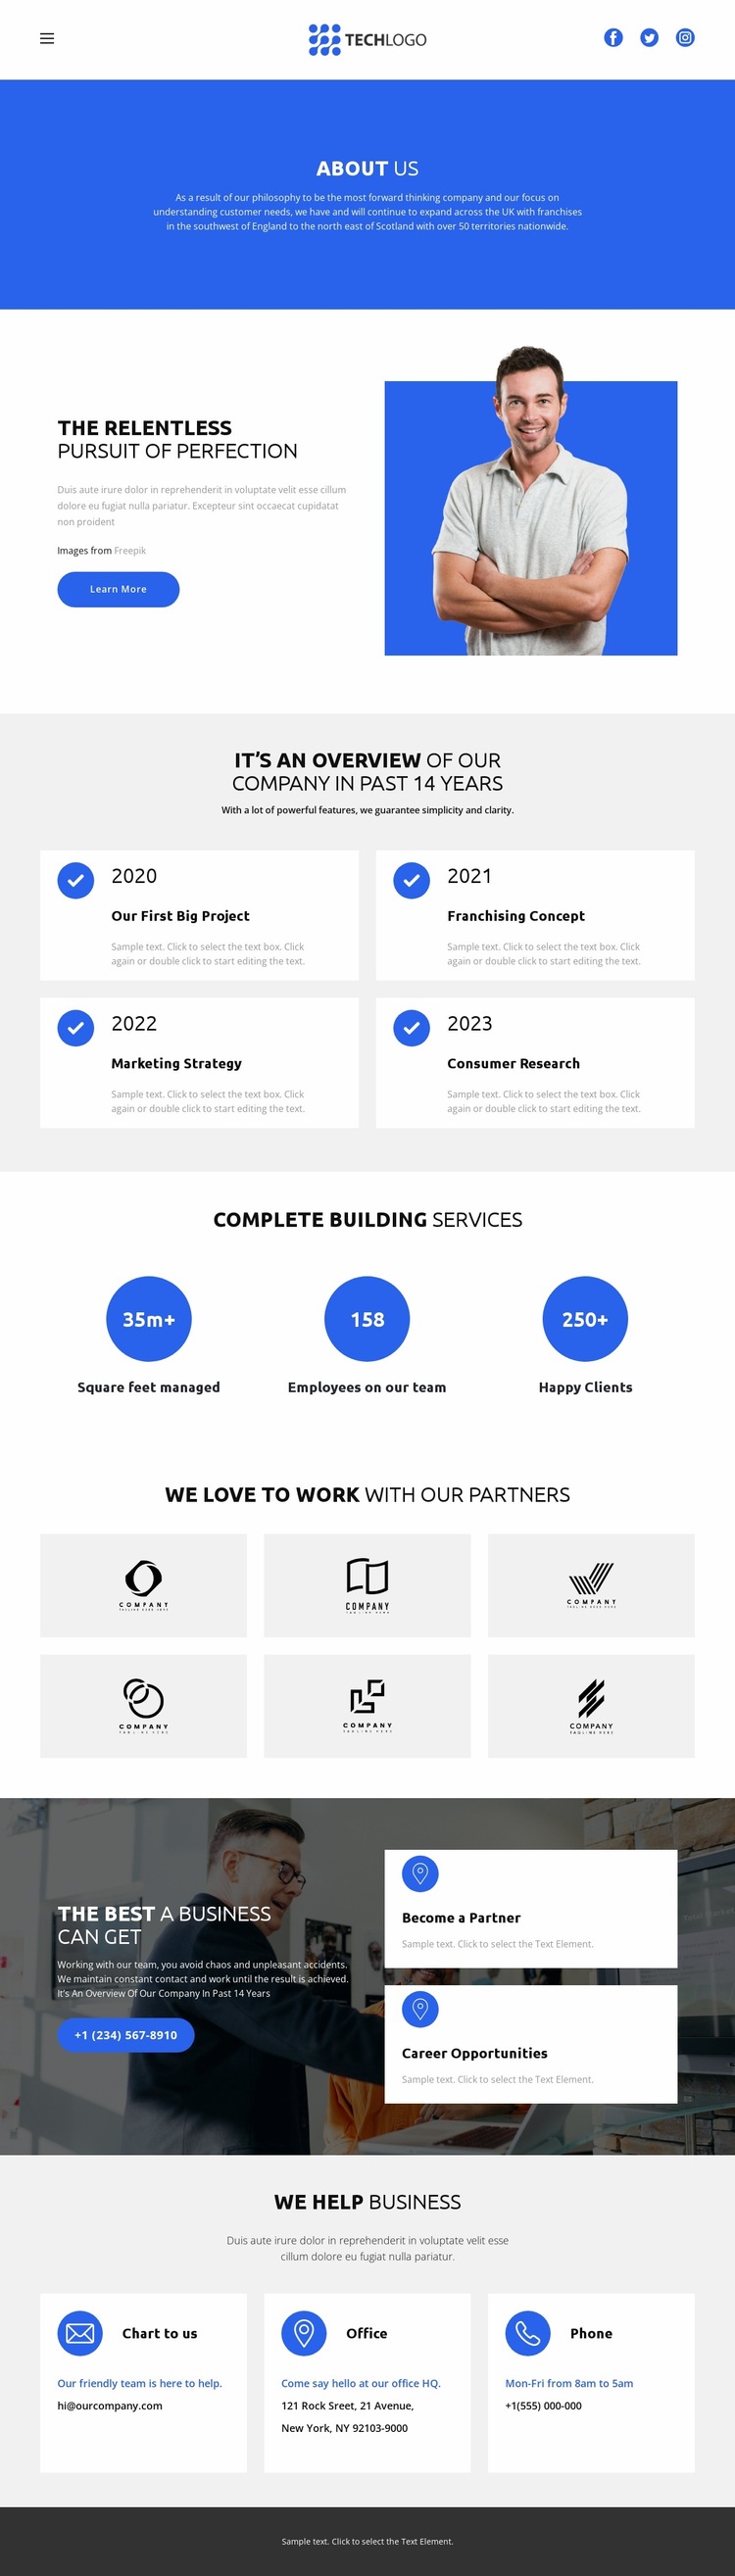 Want to join Website Builder Templates